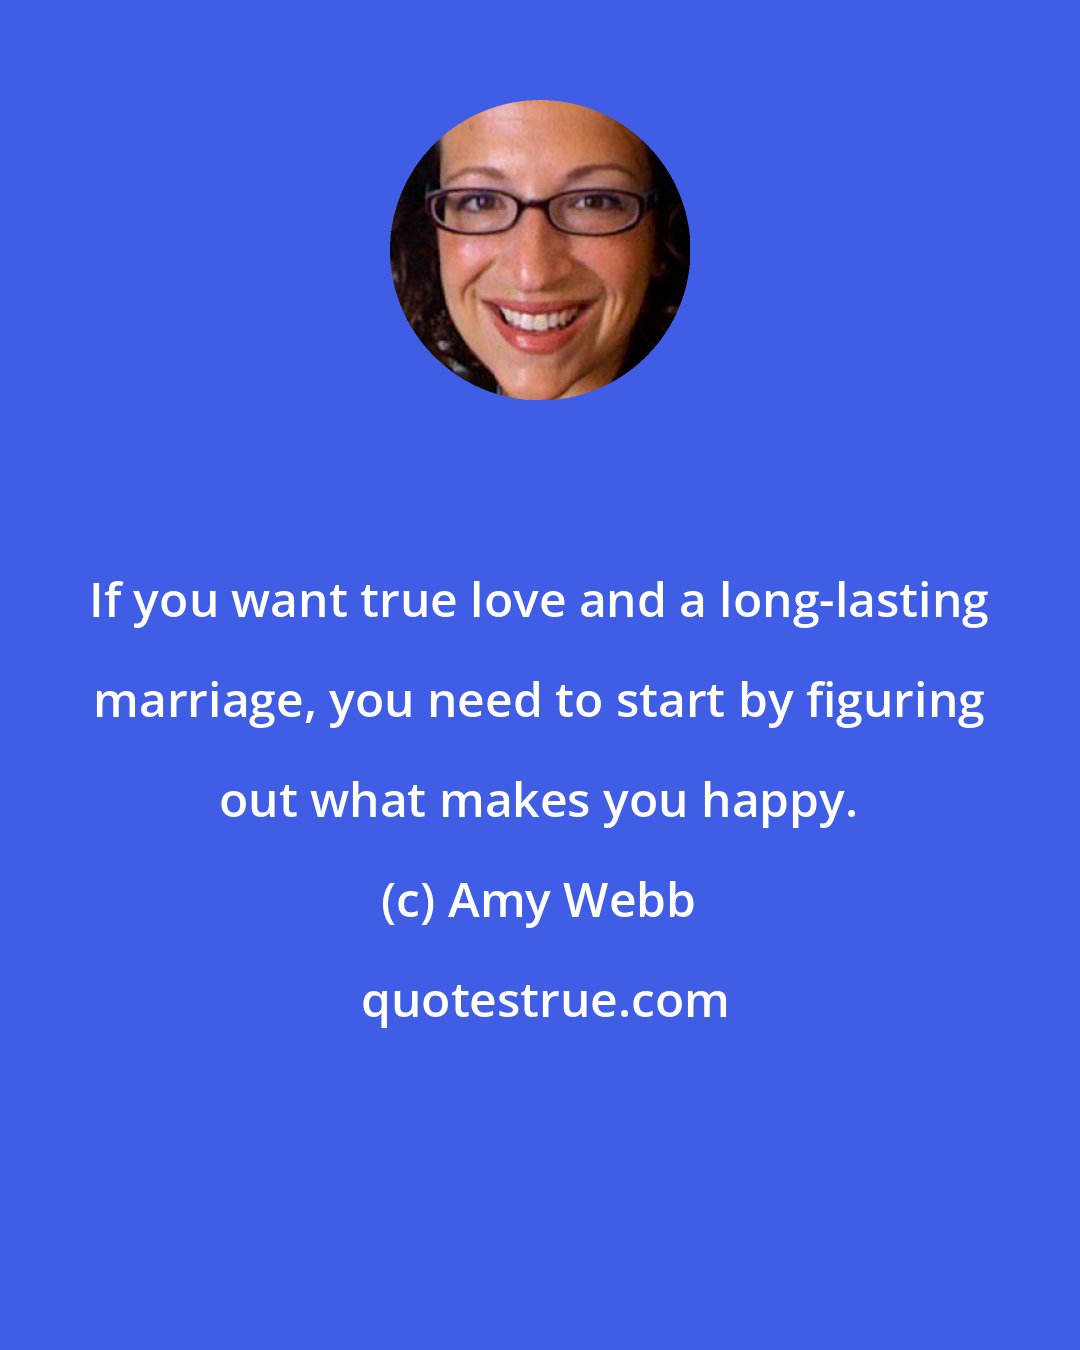 Amy Webb: If you want true love and a long-lasting marriage, you need to start by figuring out what makes you happy.